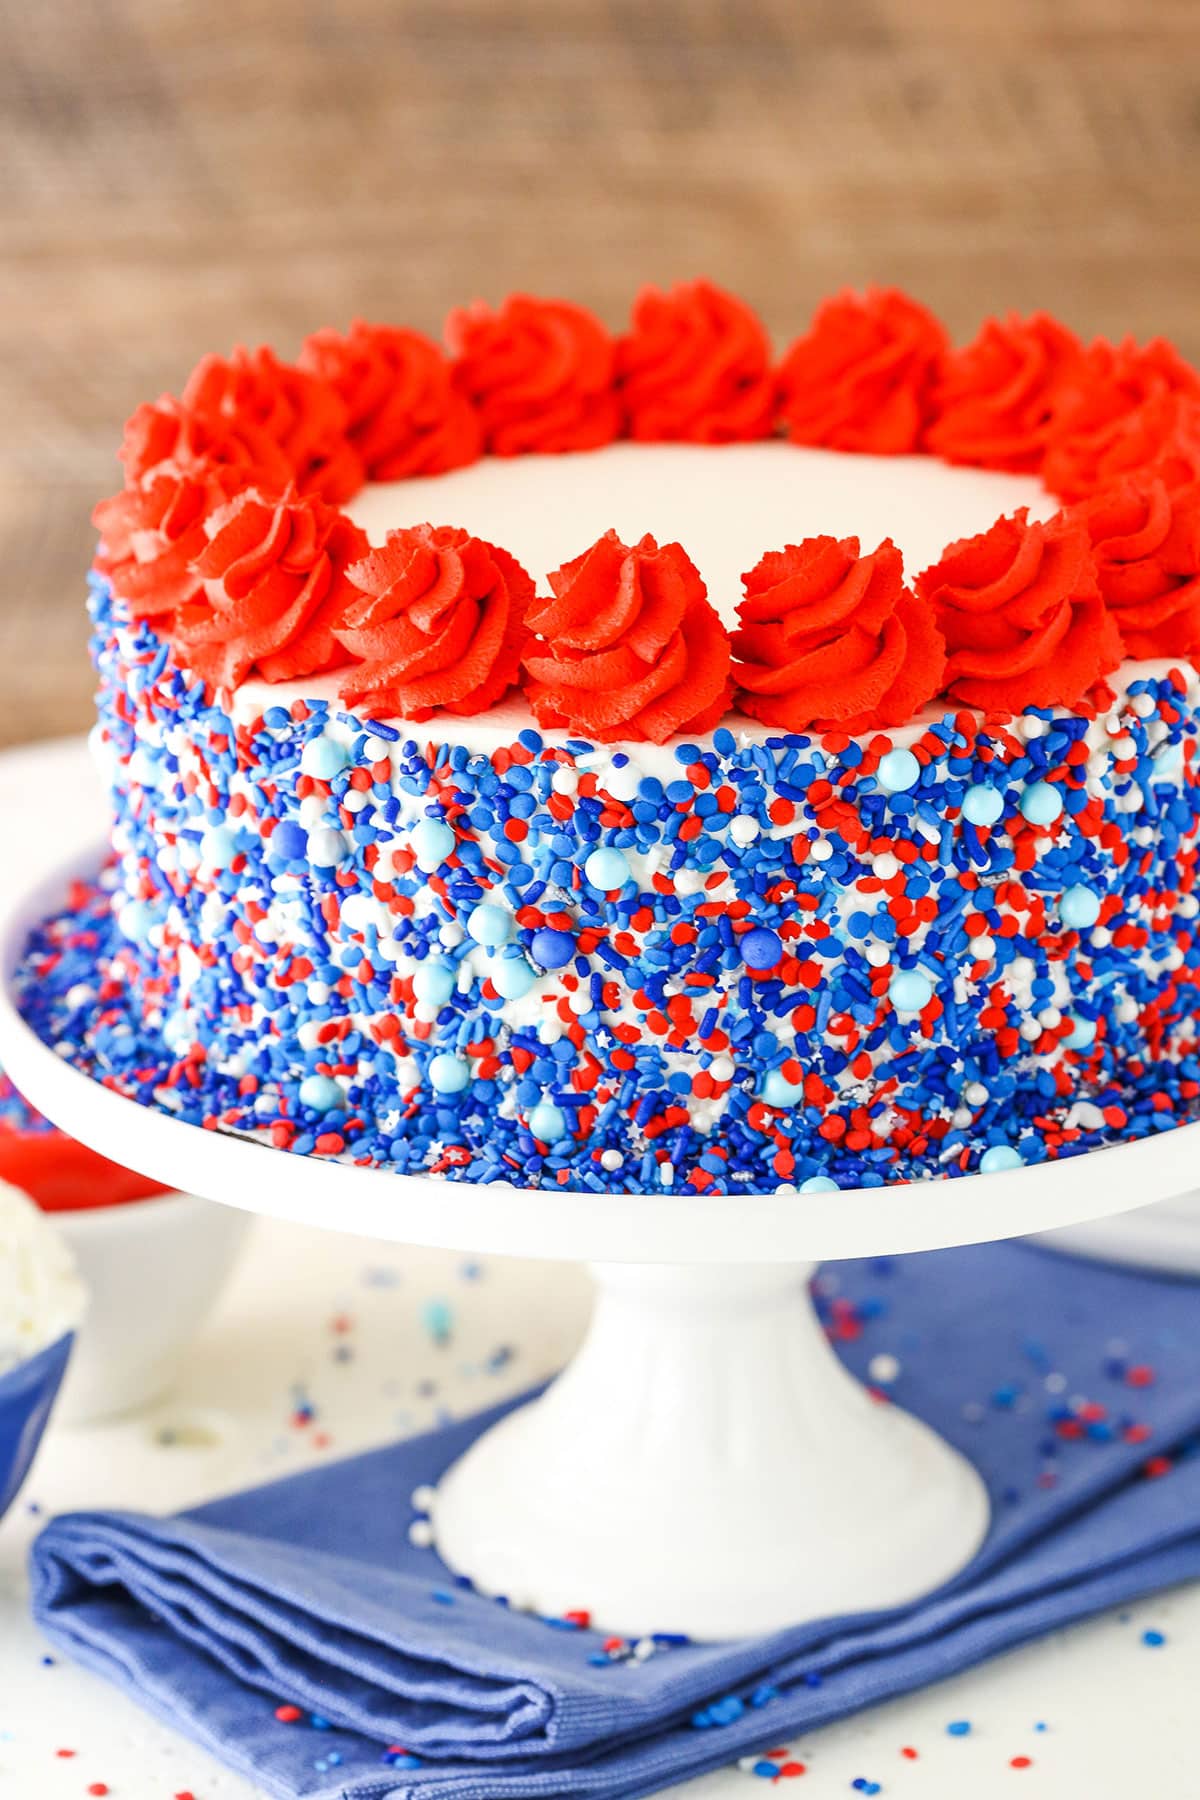 Red white and blue ice cream cake on a cake platter.